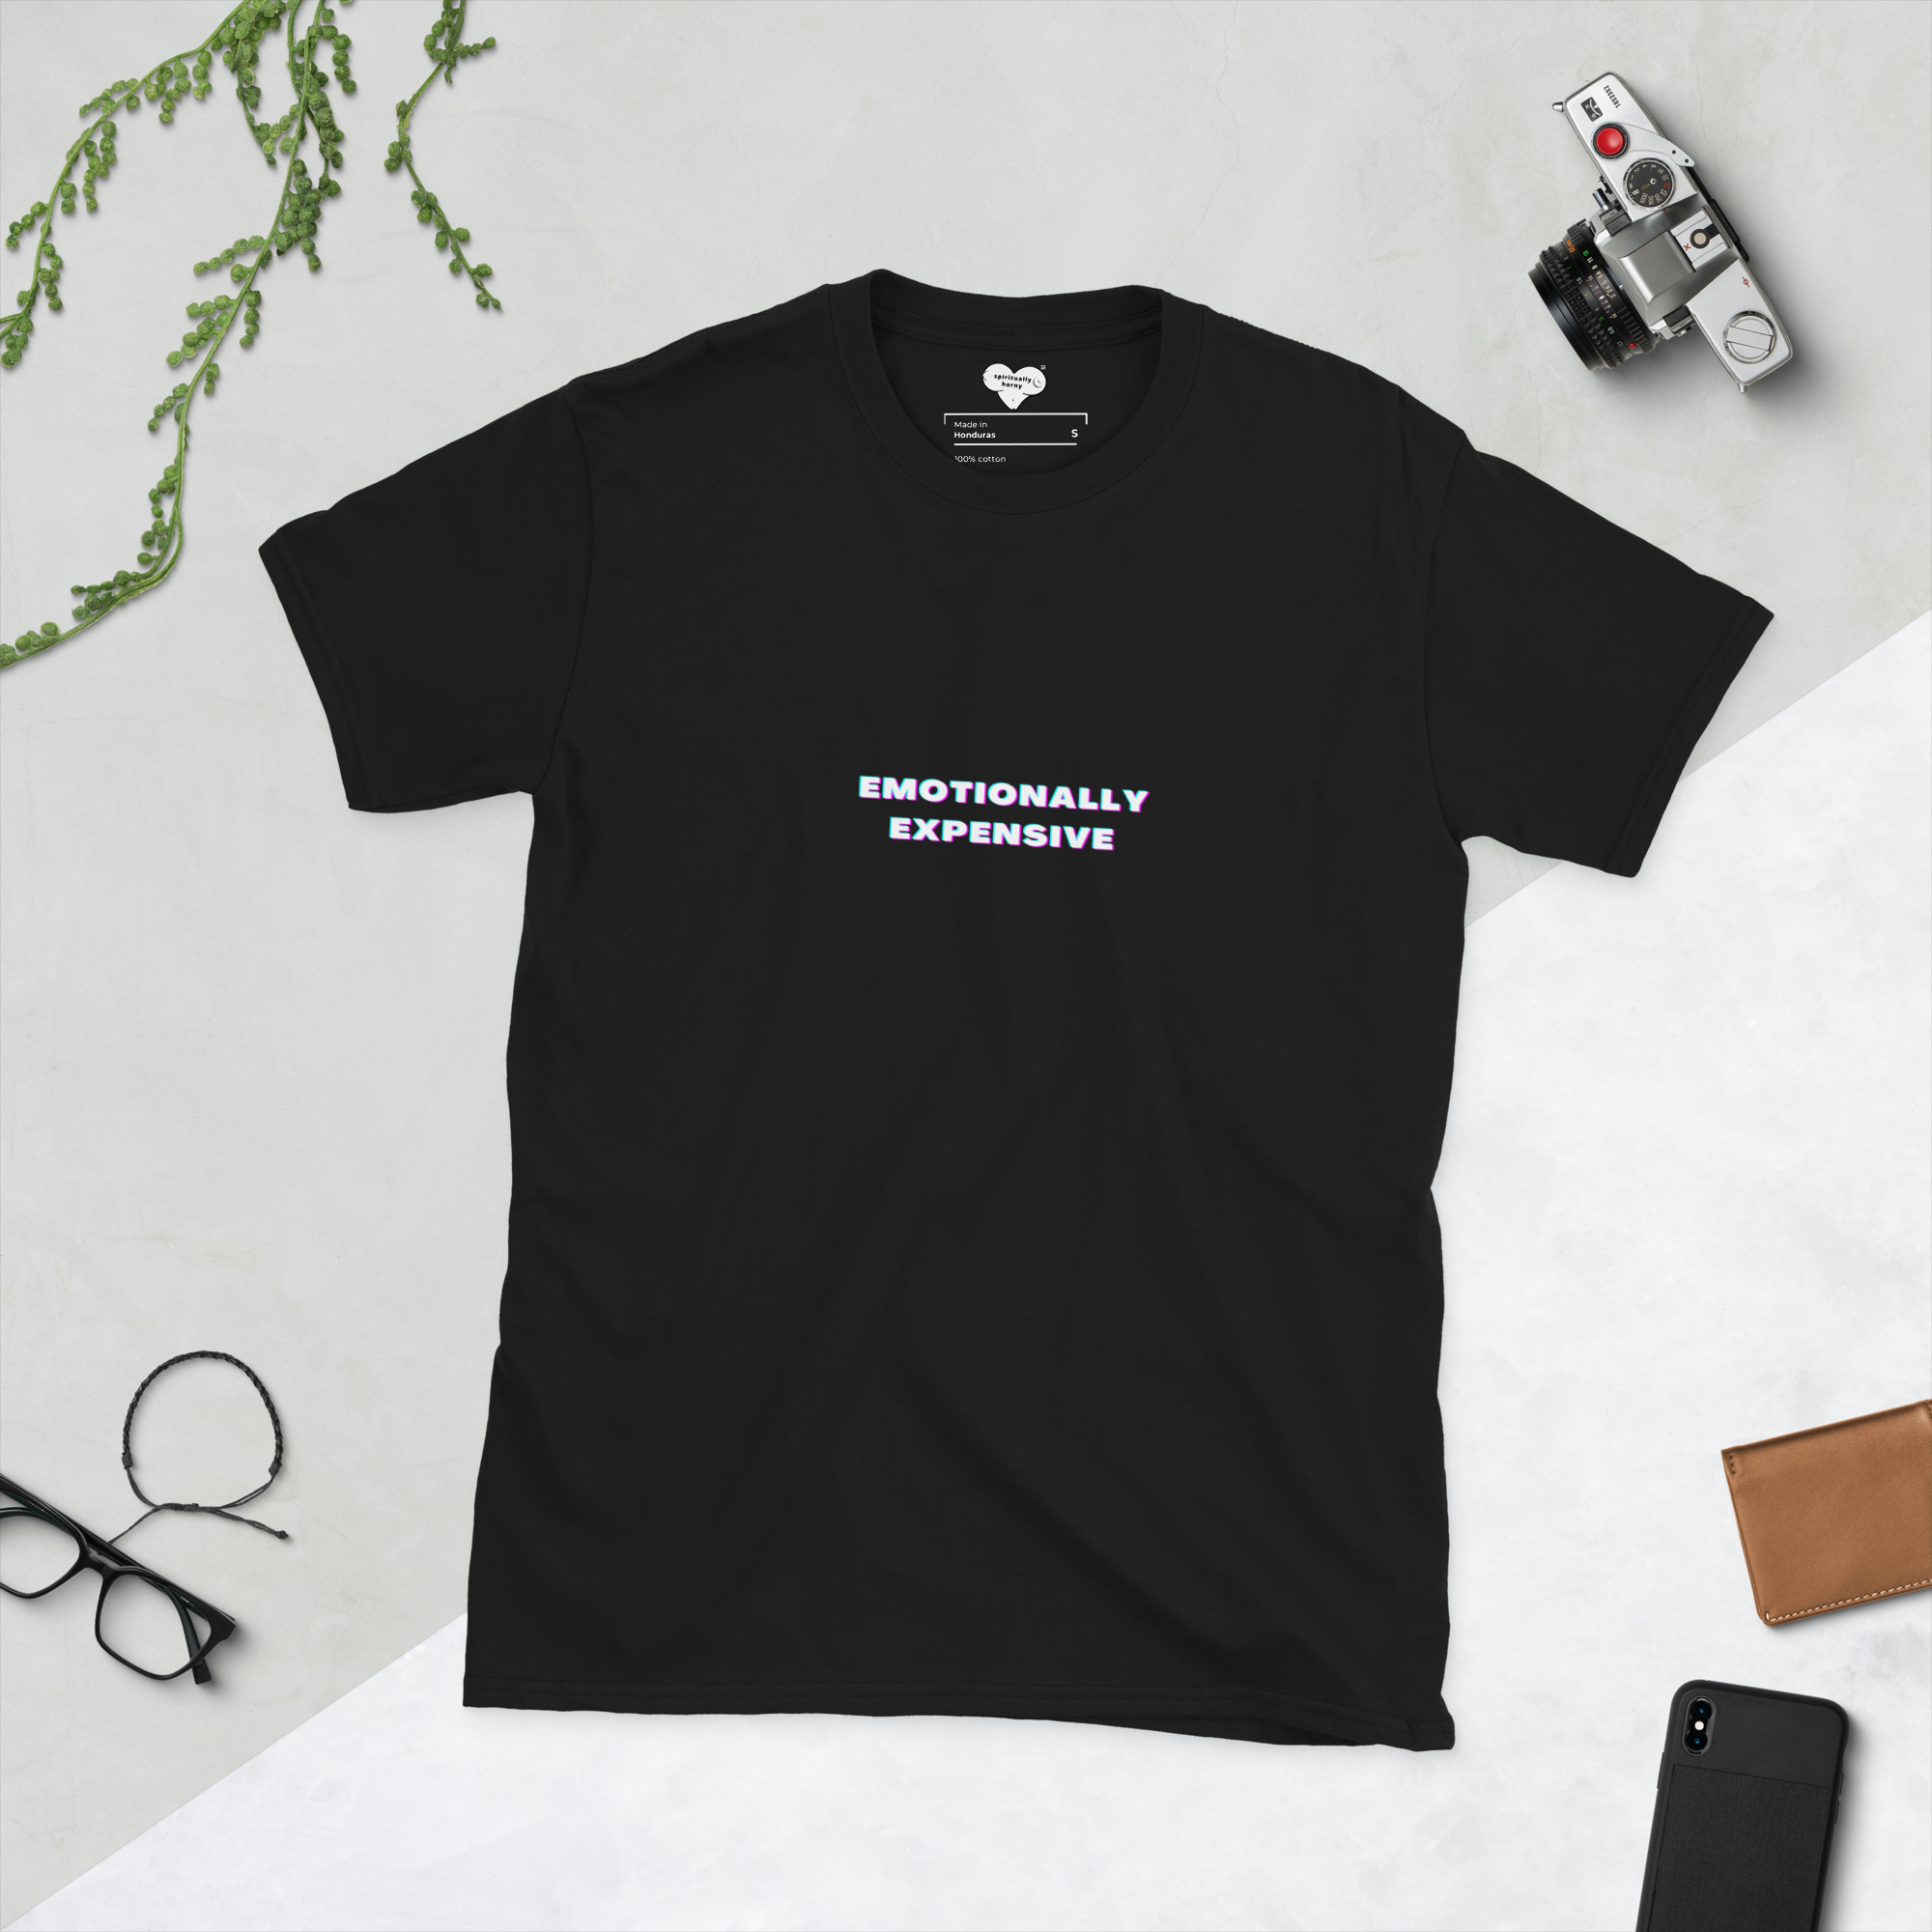 Emotionally Expensive Tee